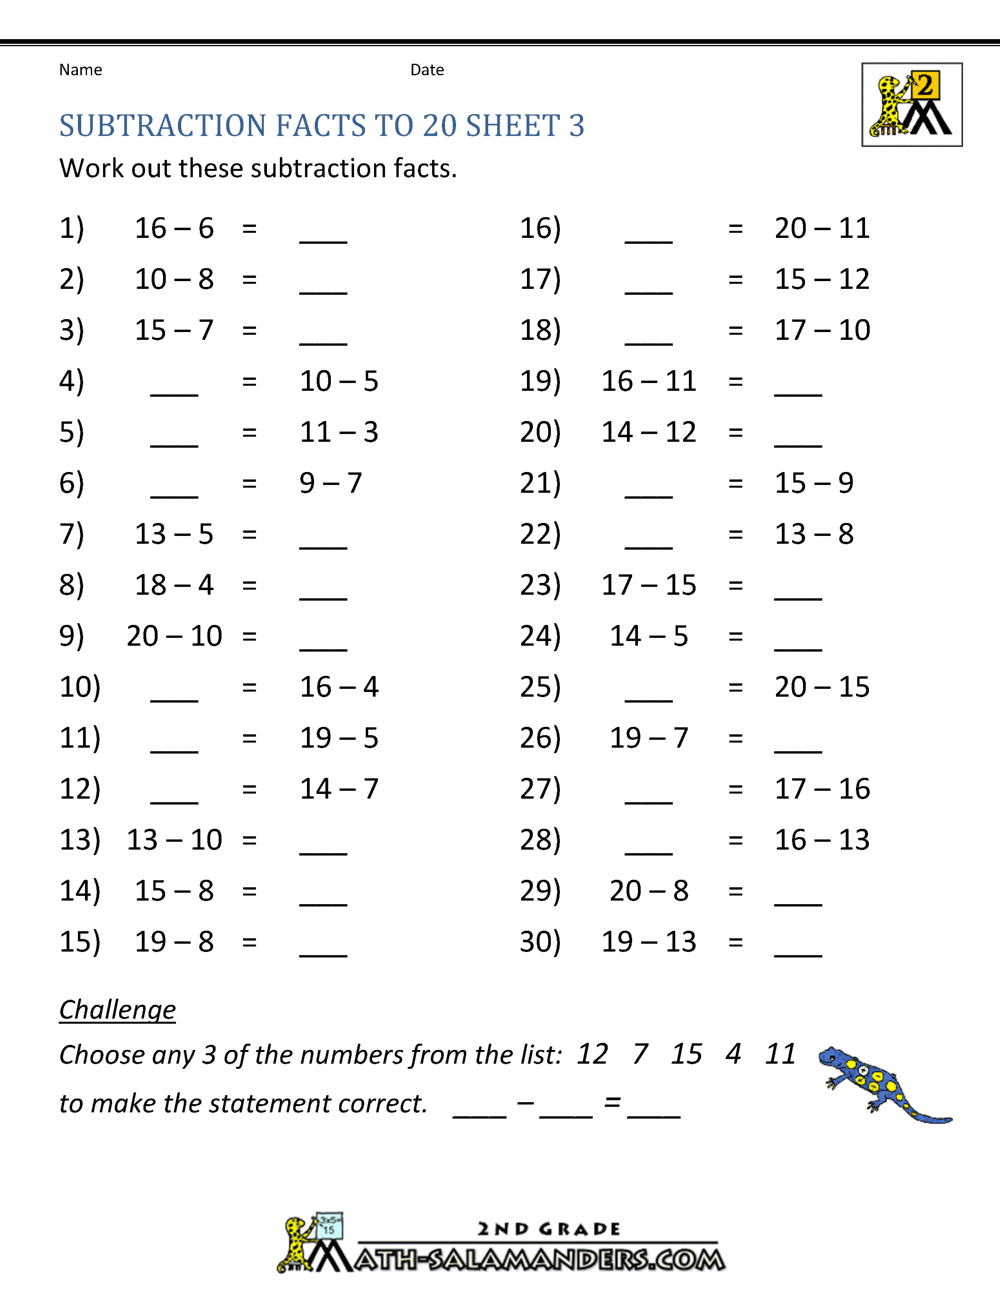 subtraction-facts-worksheets